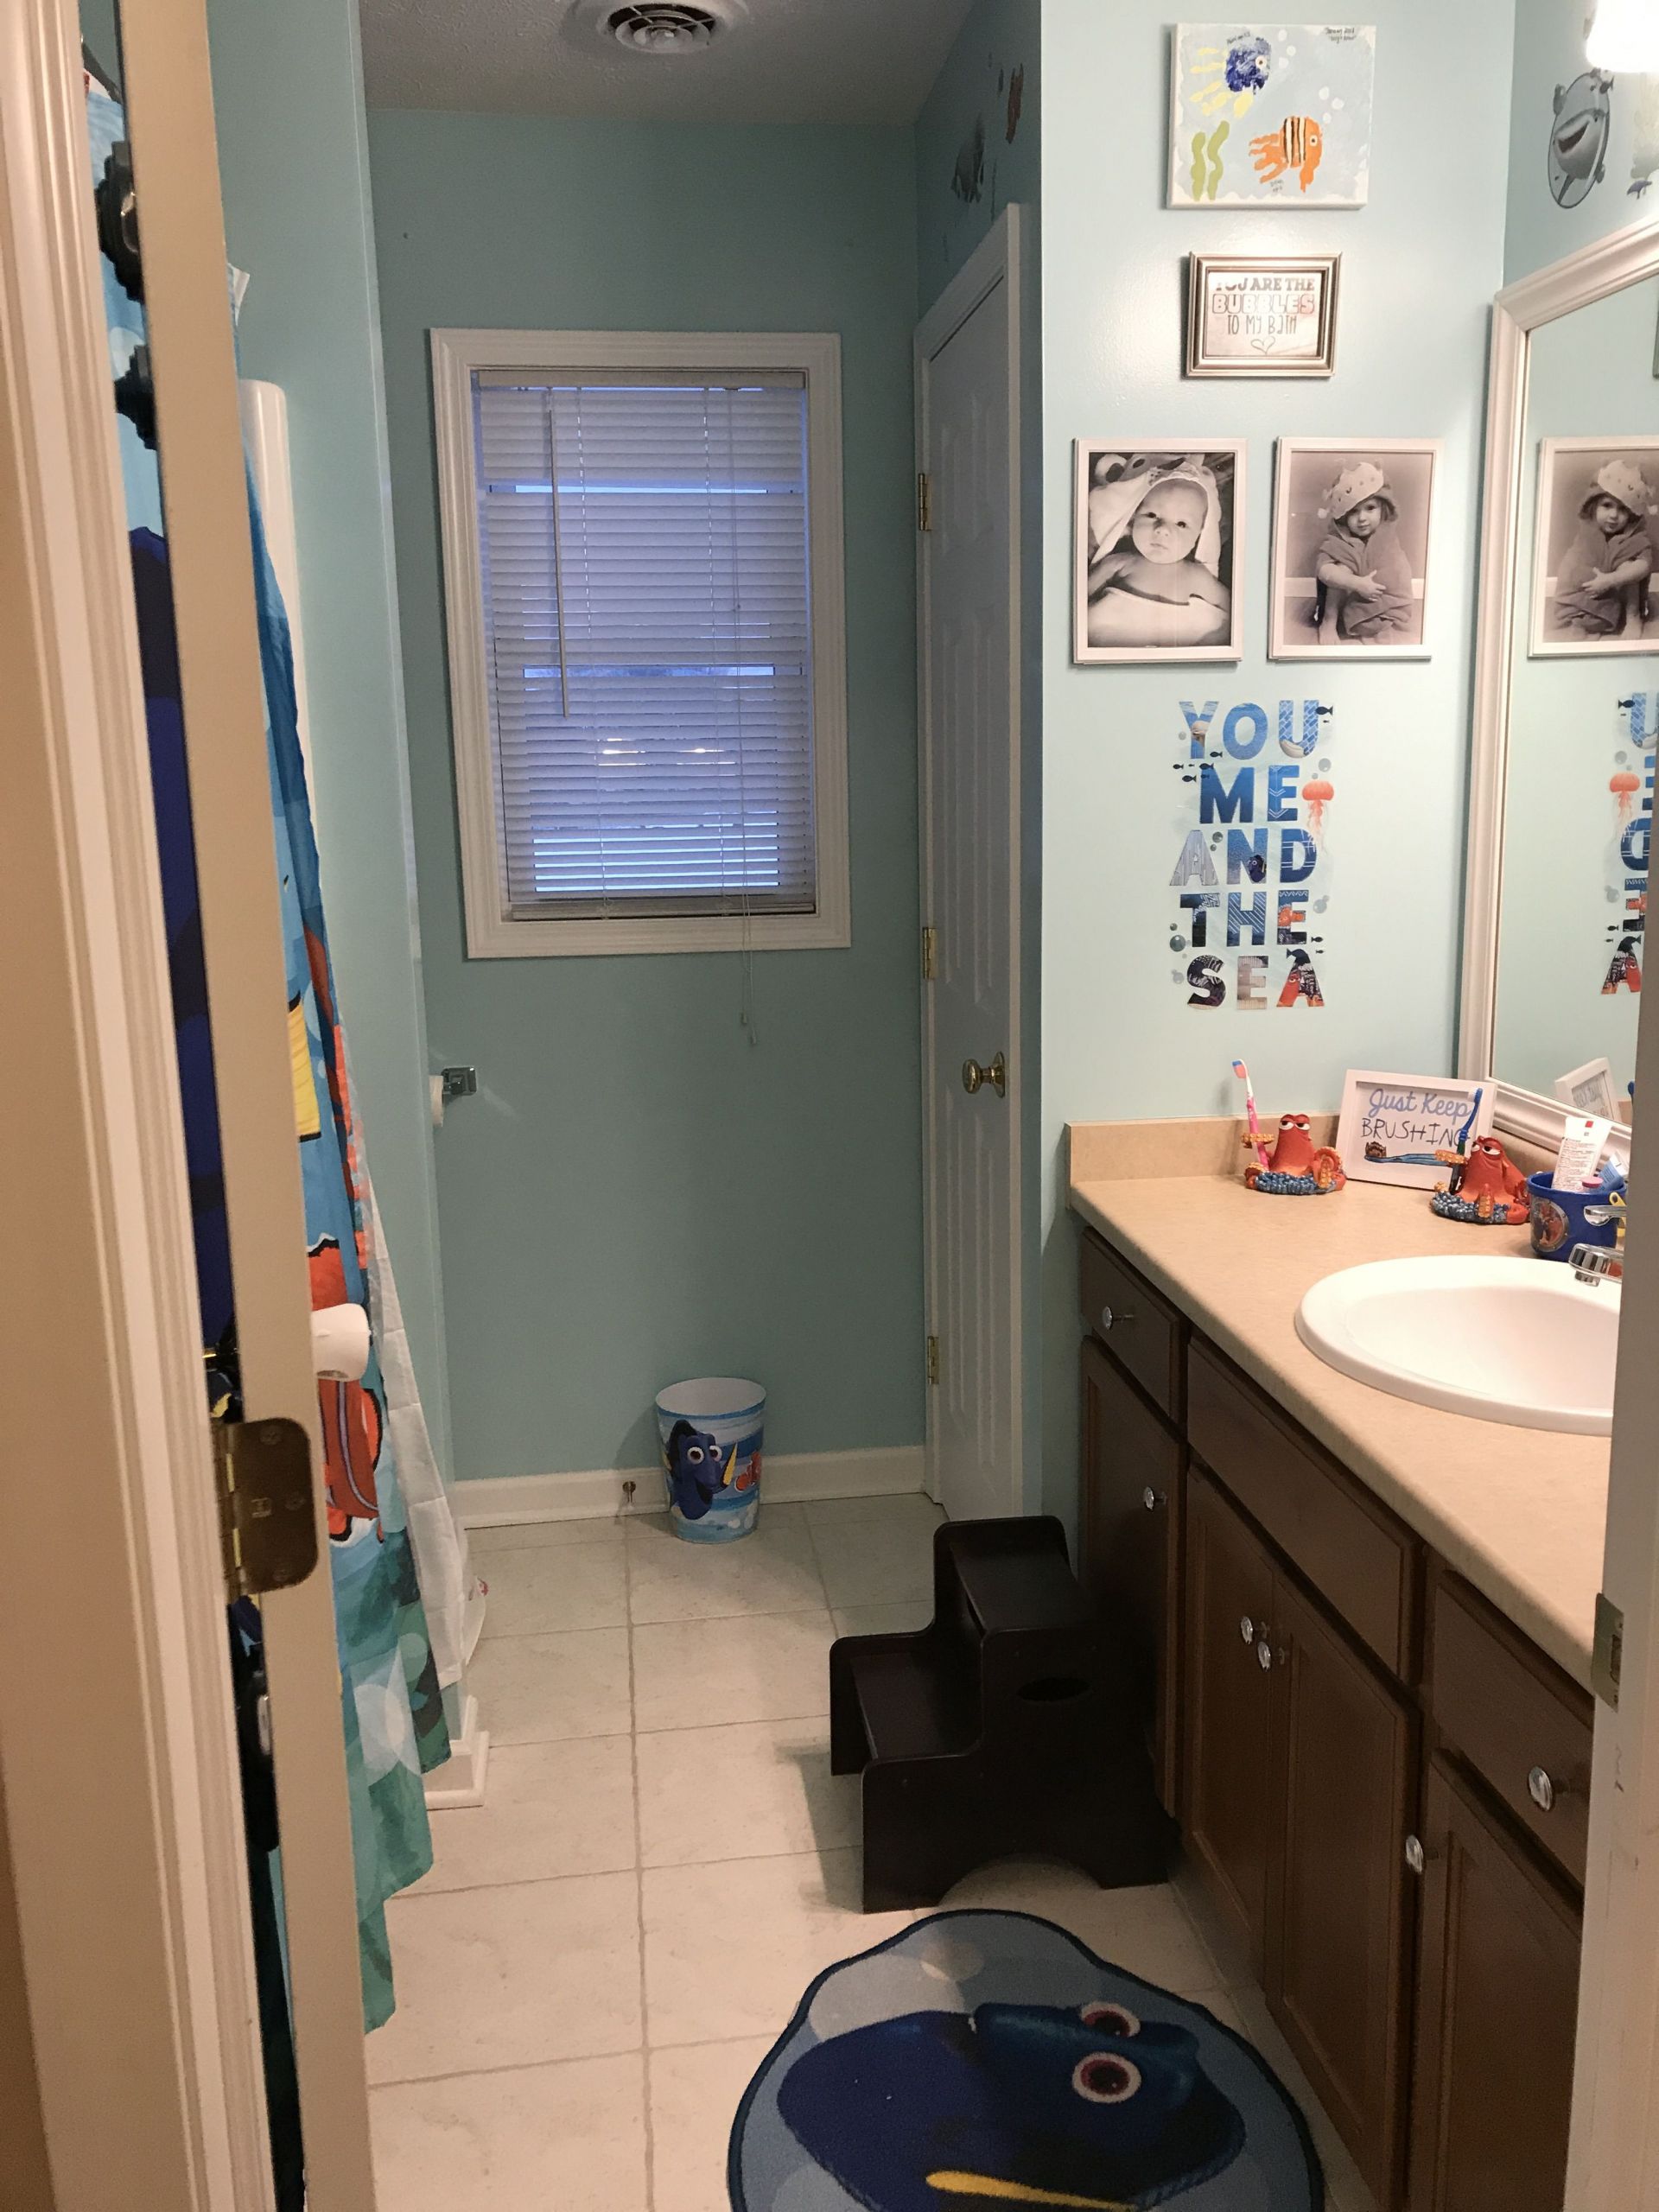 Finding Dory Bathroom Decor
 Our finished kids finding dory bathroom Paint is wave top